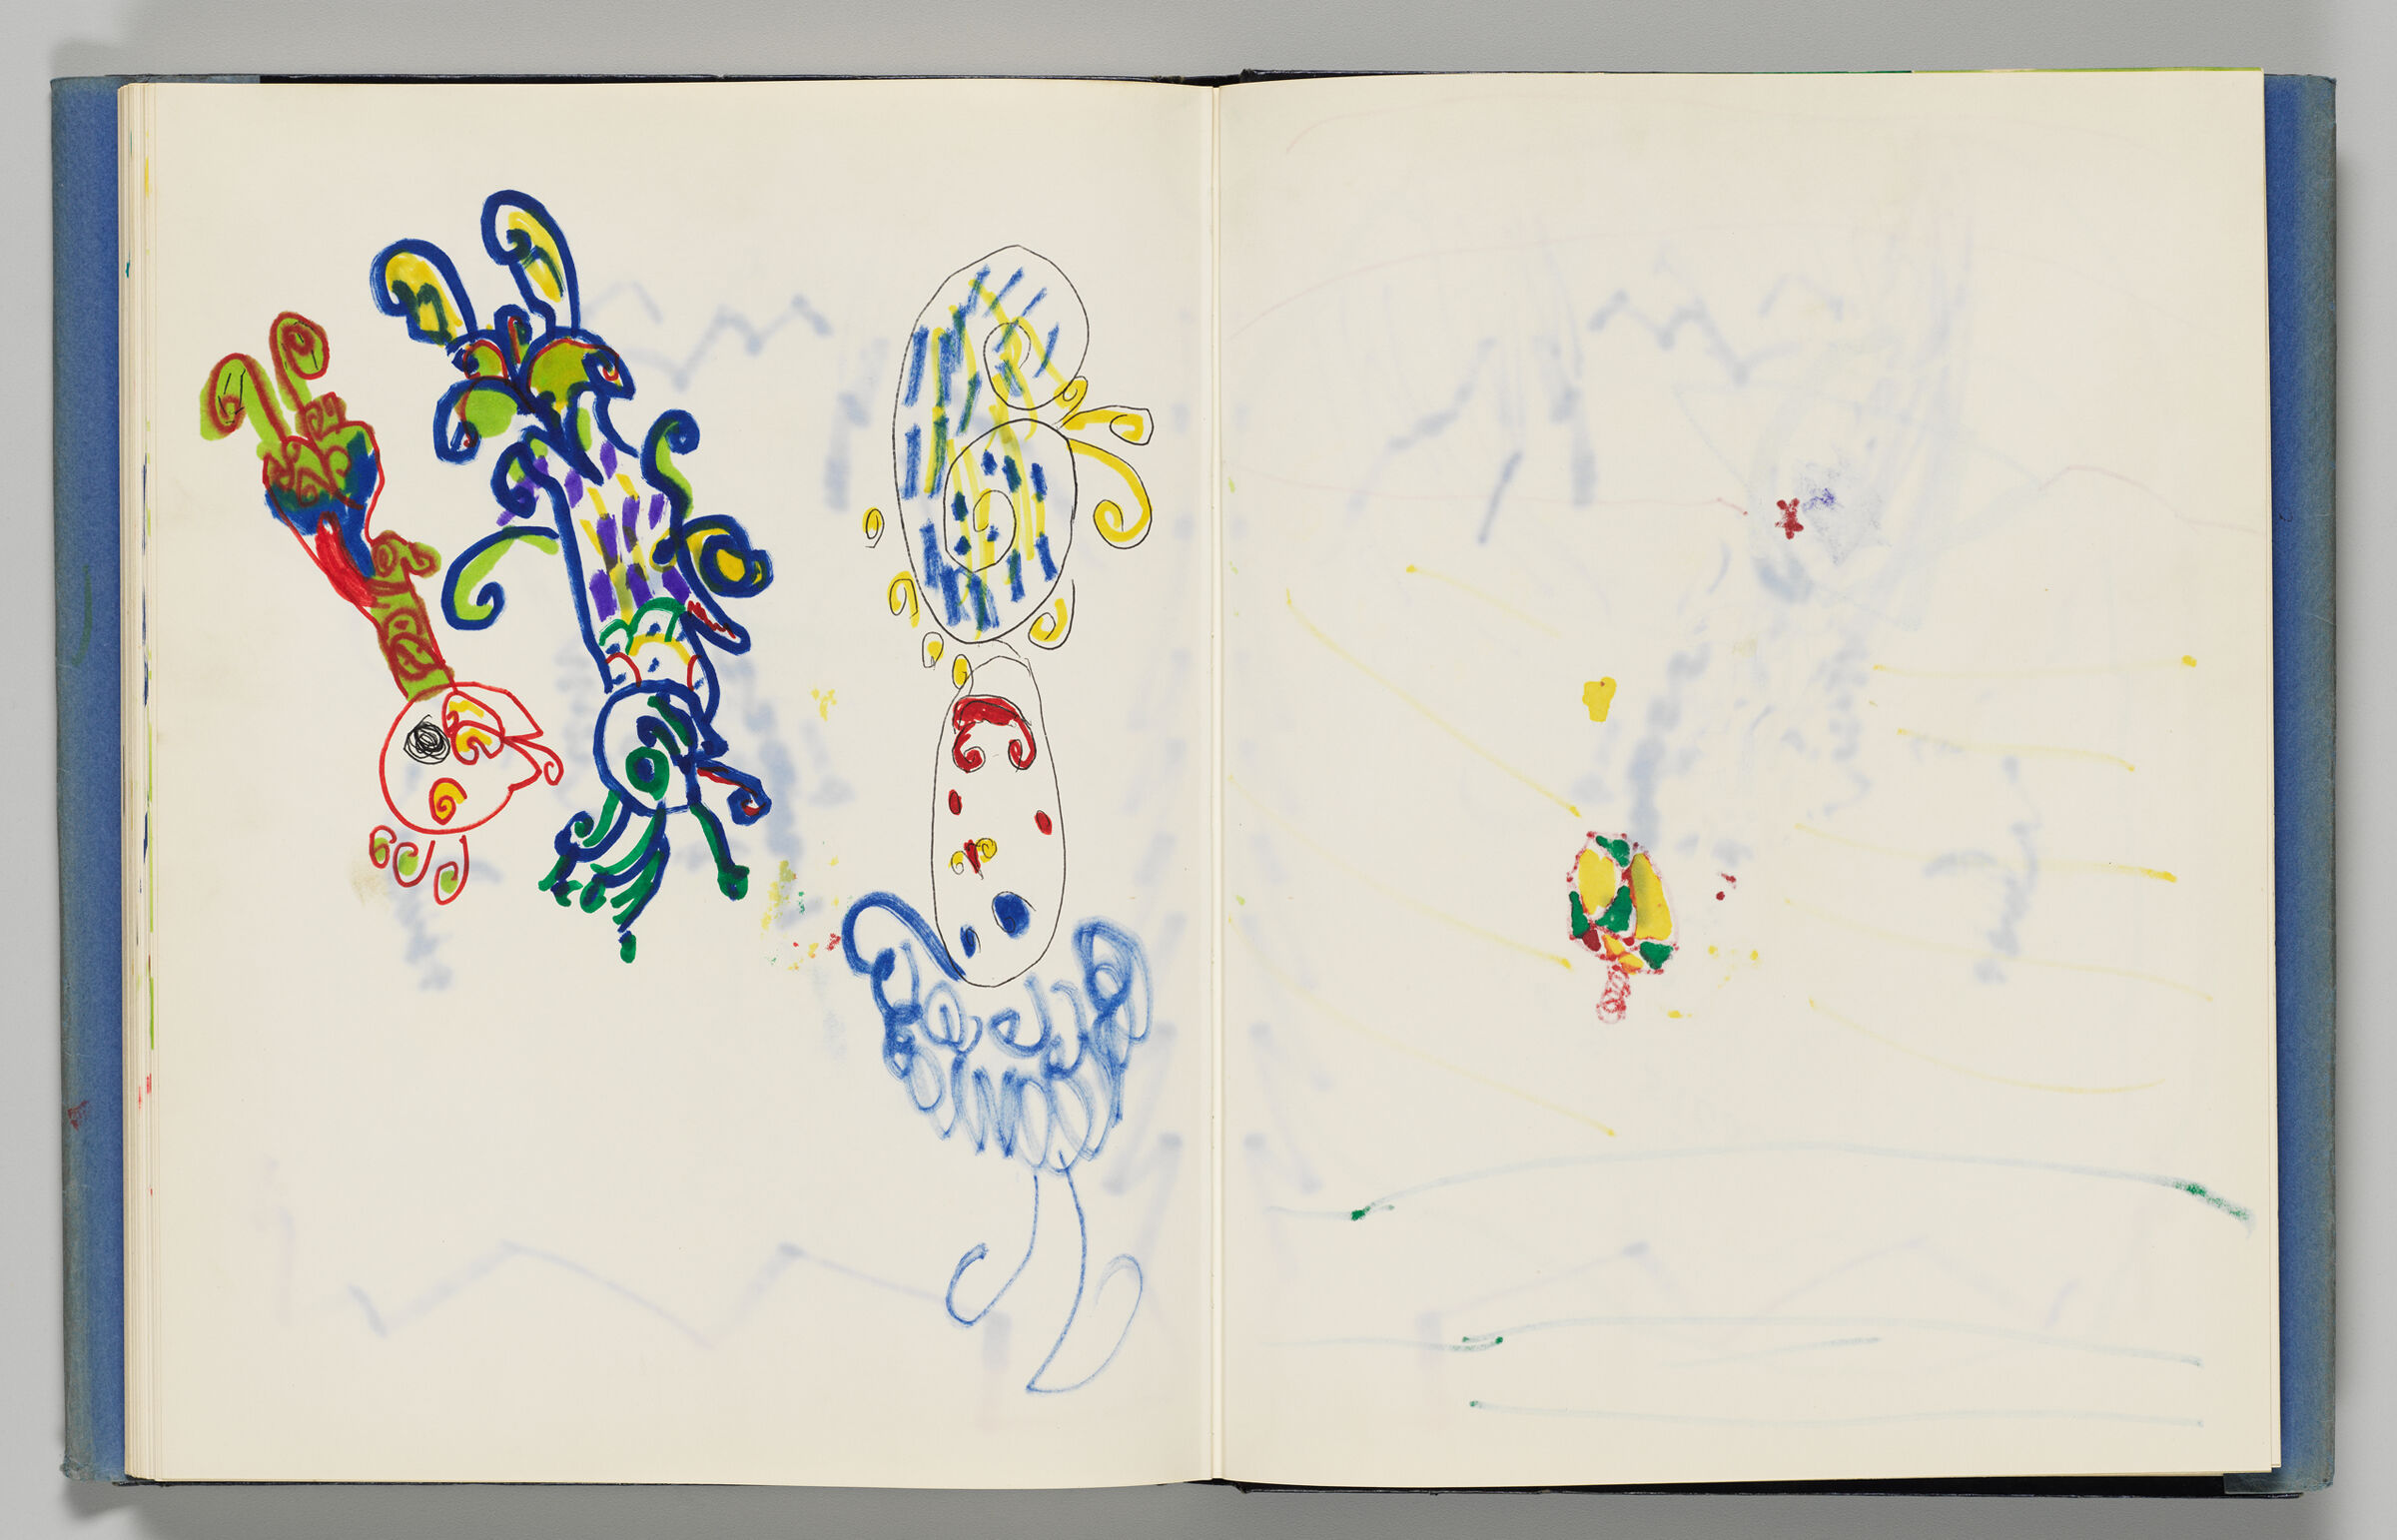 Untitled (Child's Drawing With Color Transfer, Left Page); Untitled (Bleed-Through Of Following Page And Color Transfer, Right Page)